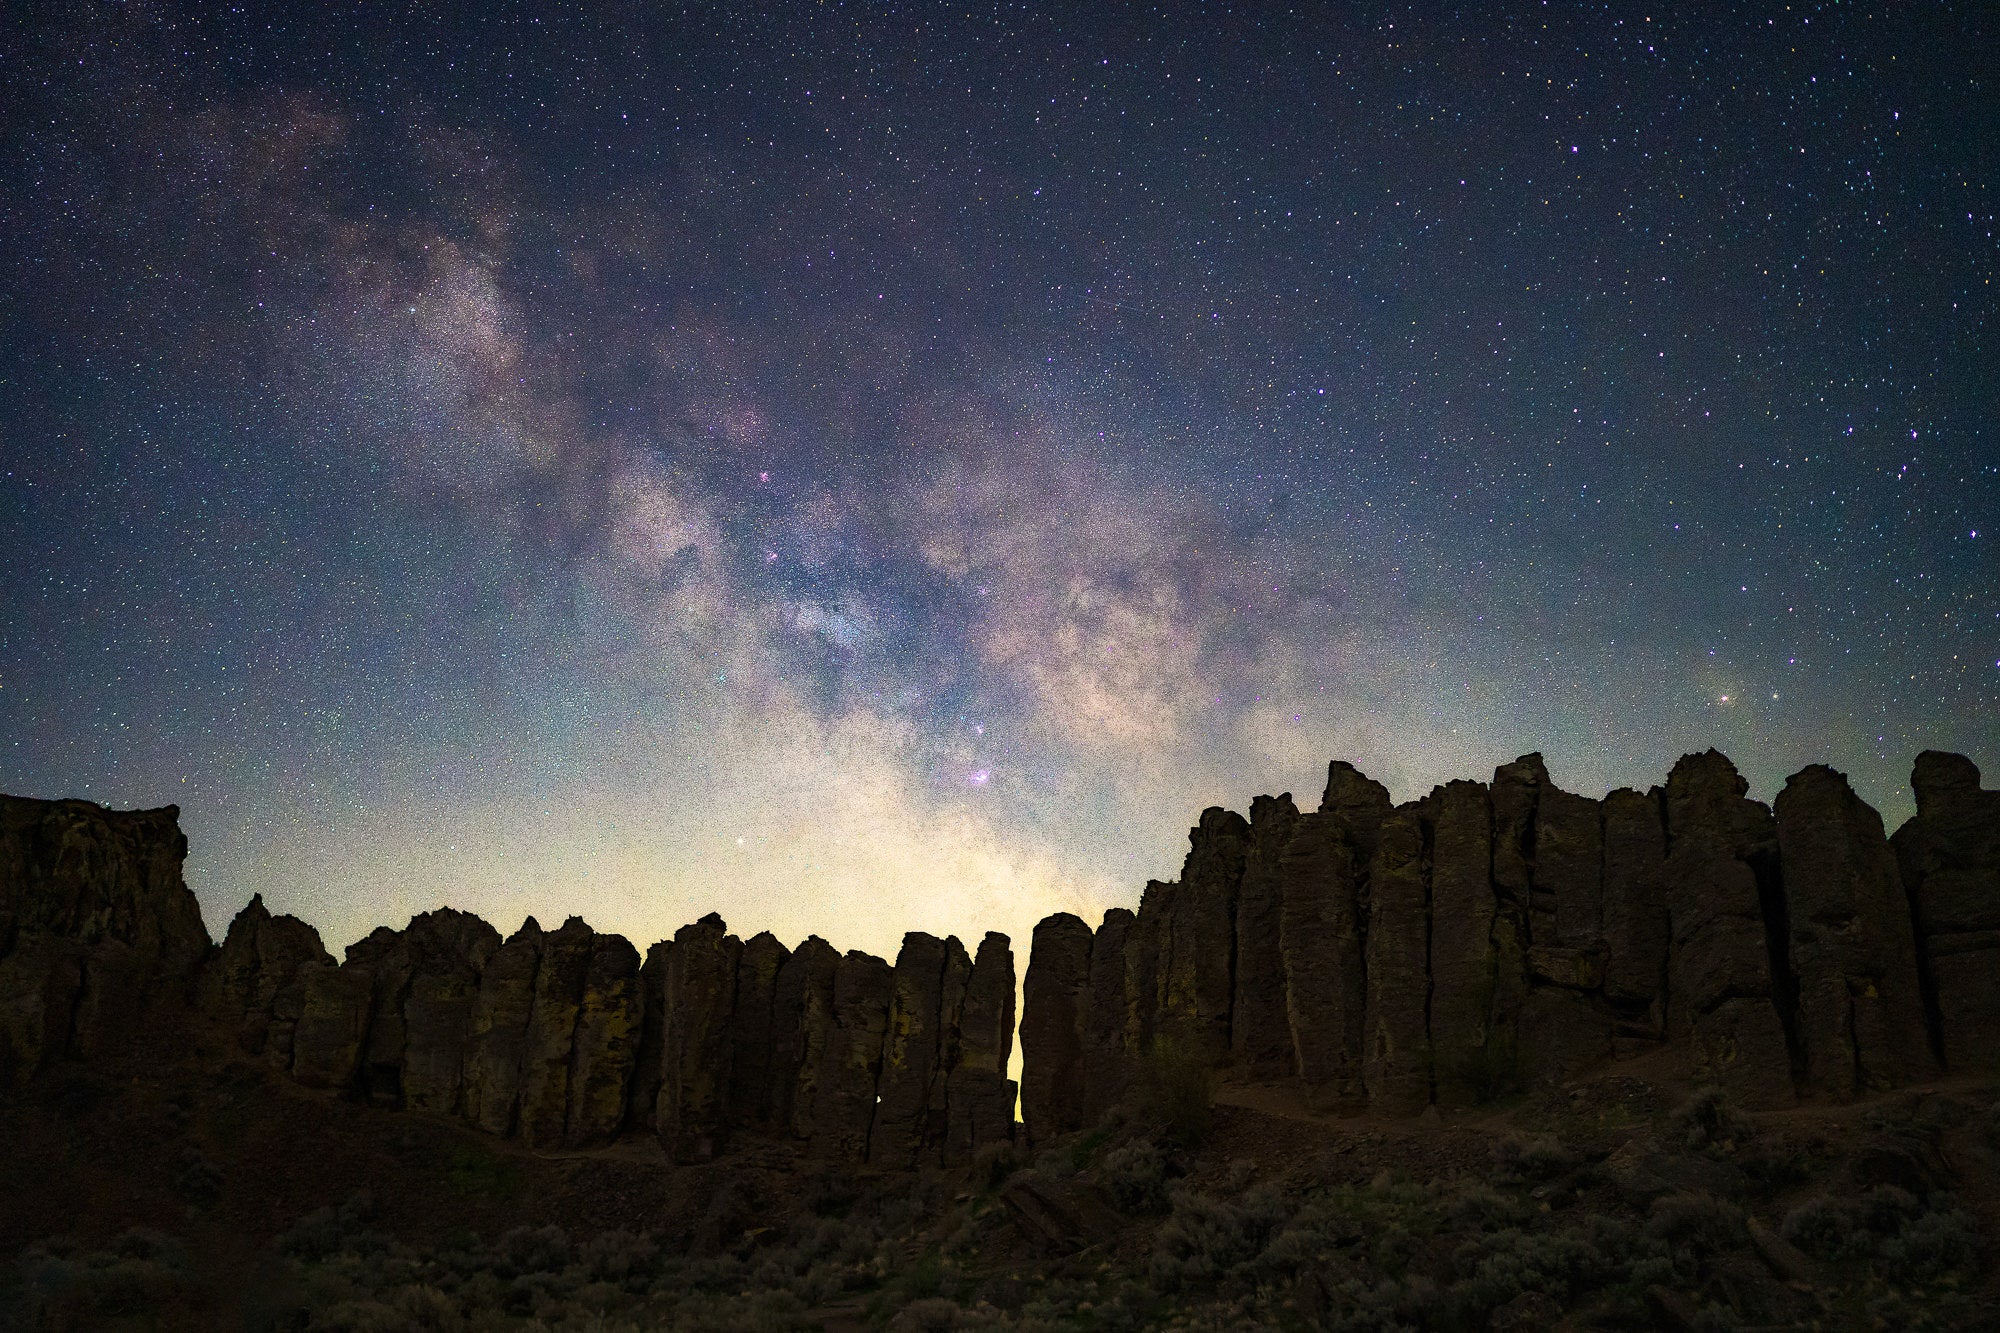 The core of the Milky Way rising over some stone pillars in eastern Washington State. Photo by Dylan McMains. Sony Alpha 7 III. Sony 35mm f/1.4 G Master. 5-sec., f/1.4, ISO 4,000